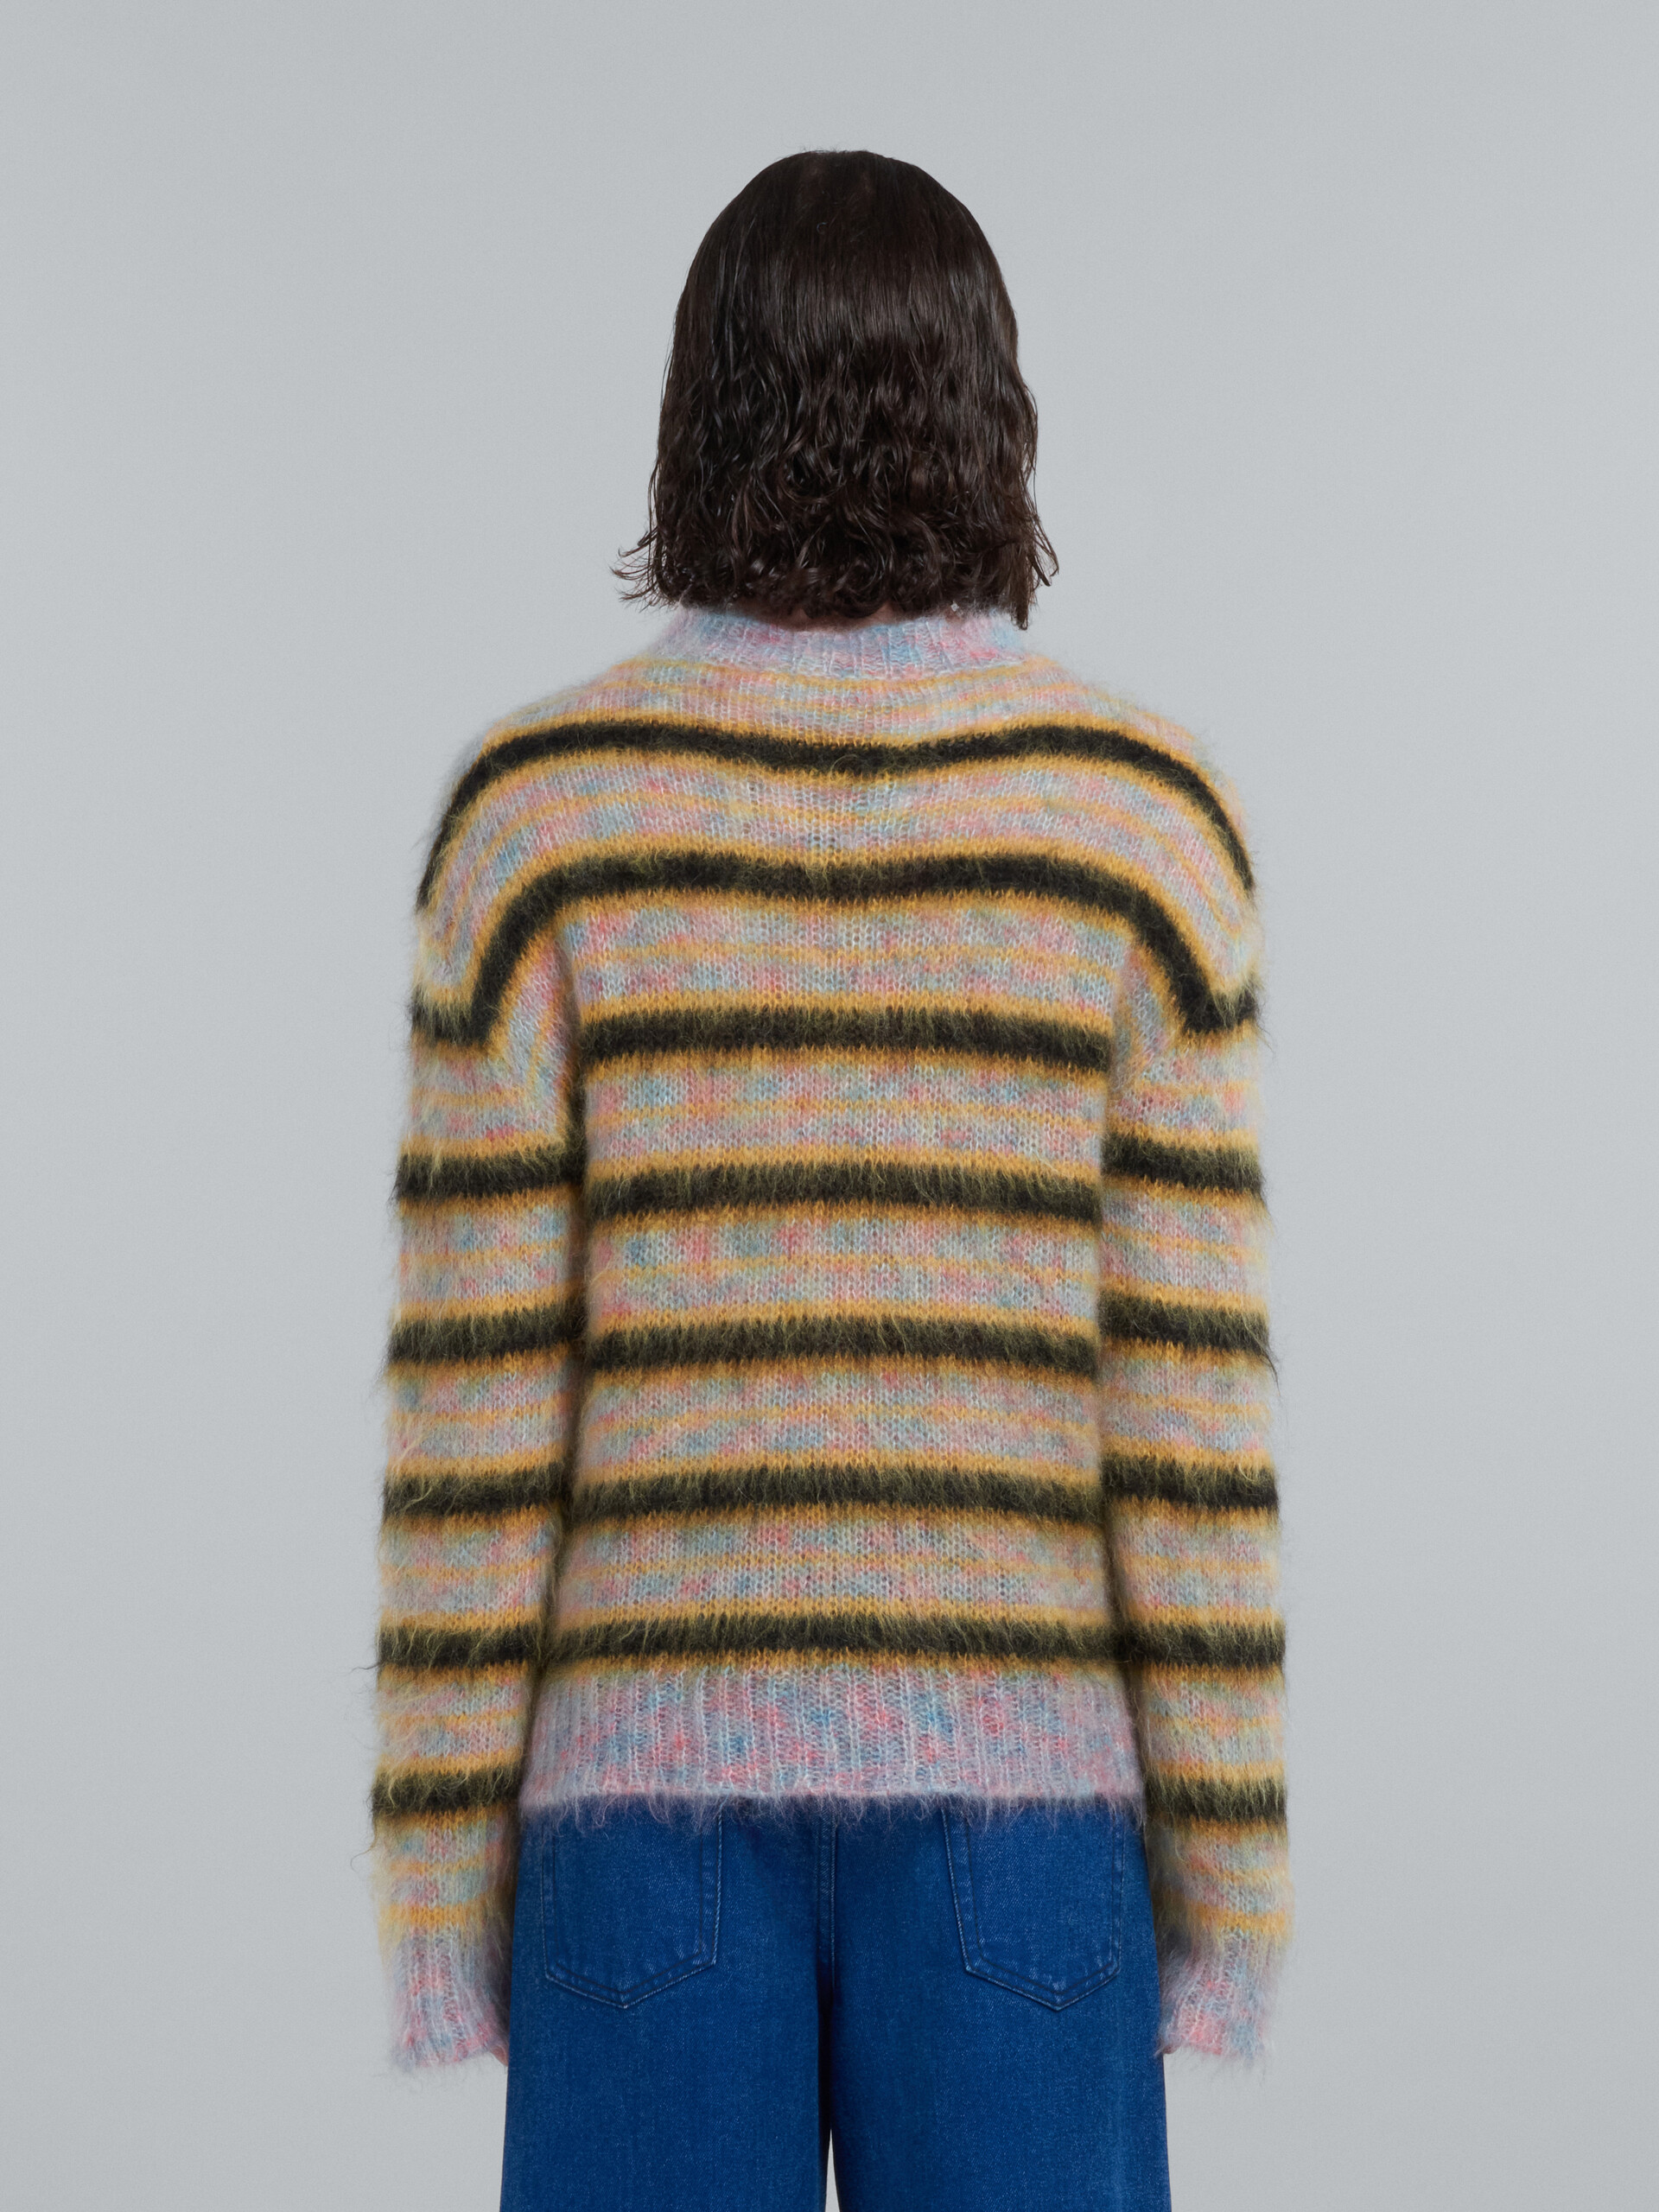 Multicolour striped mohair sweater - Pullovers - Image 3